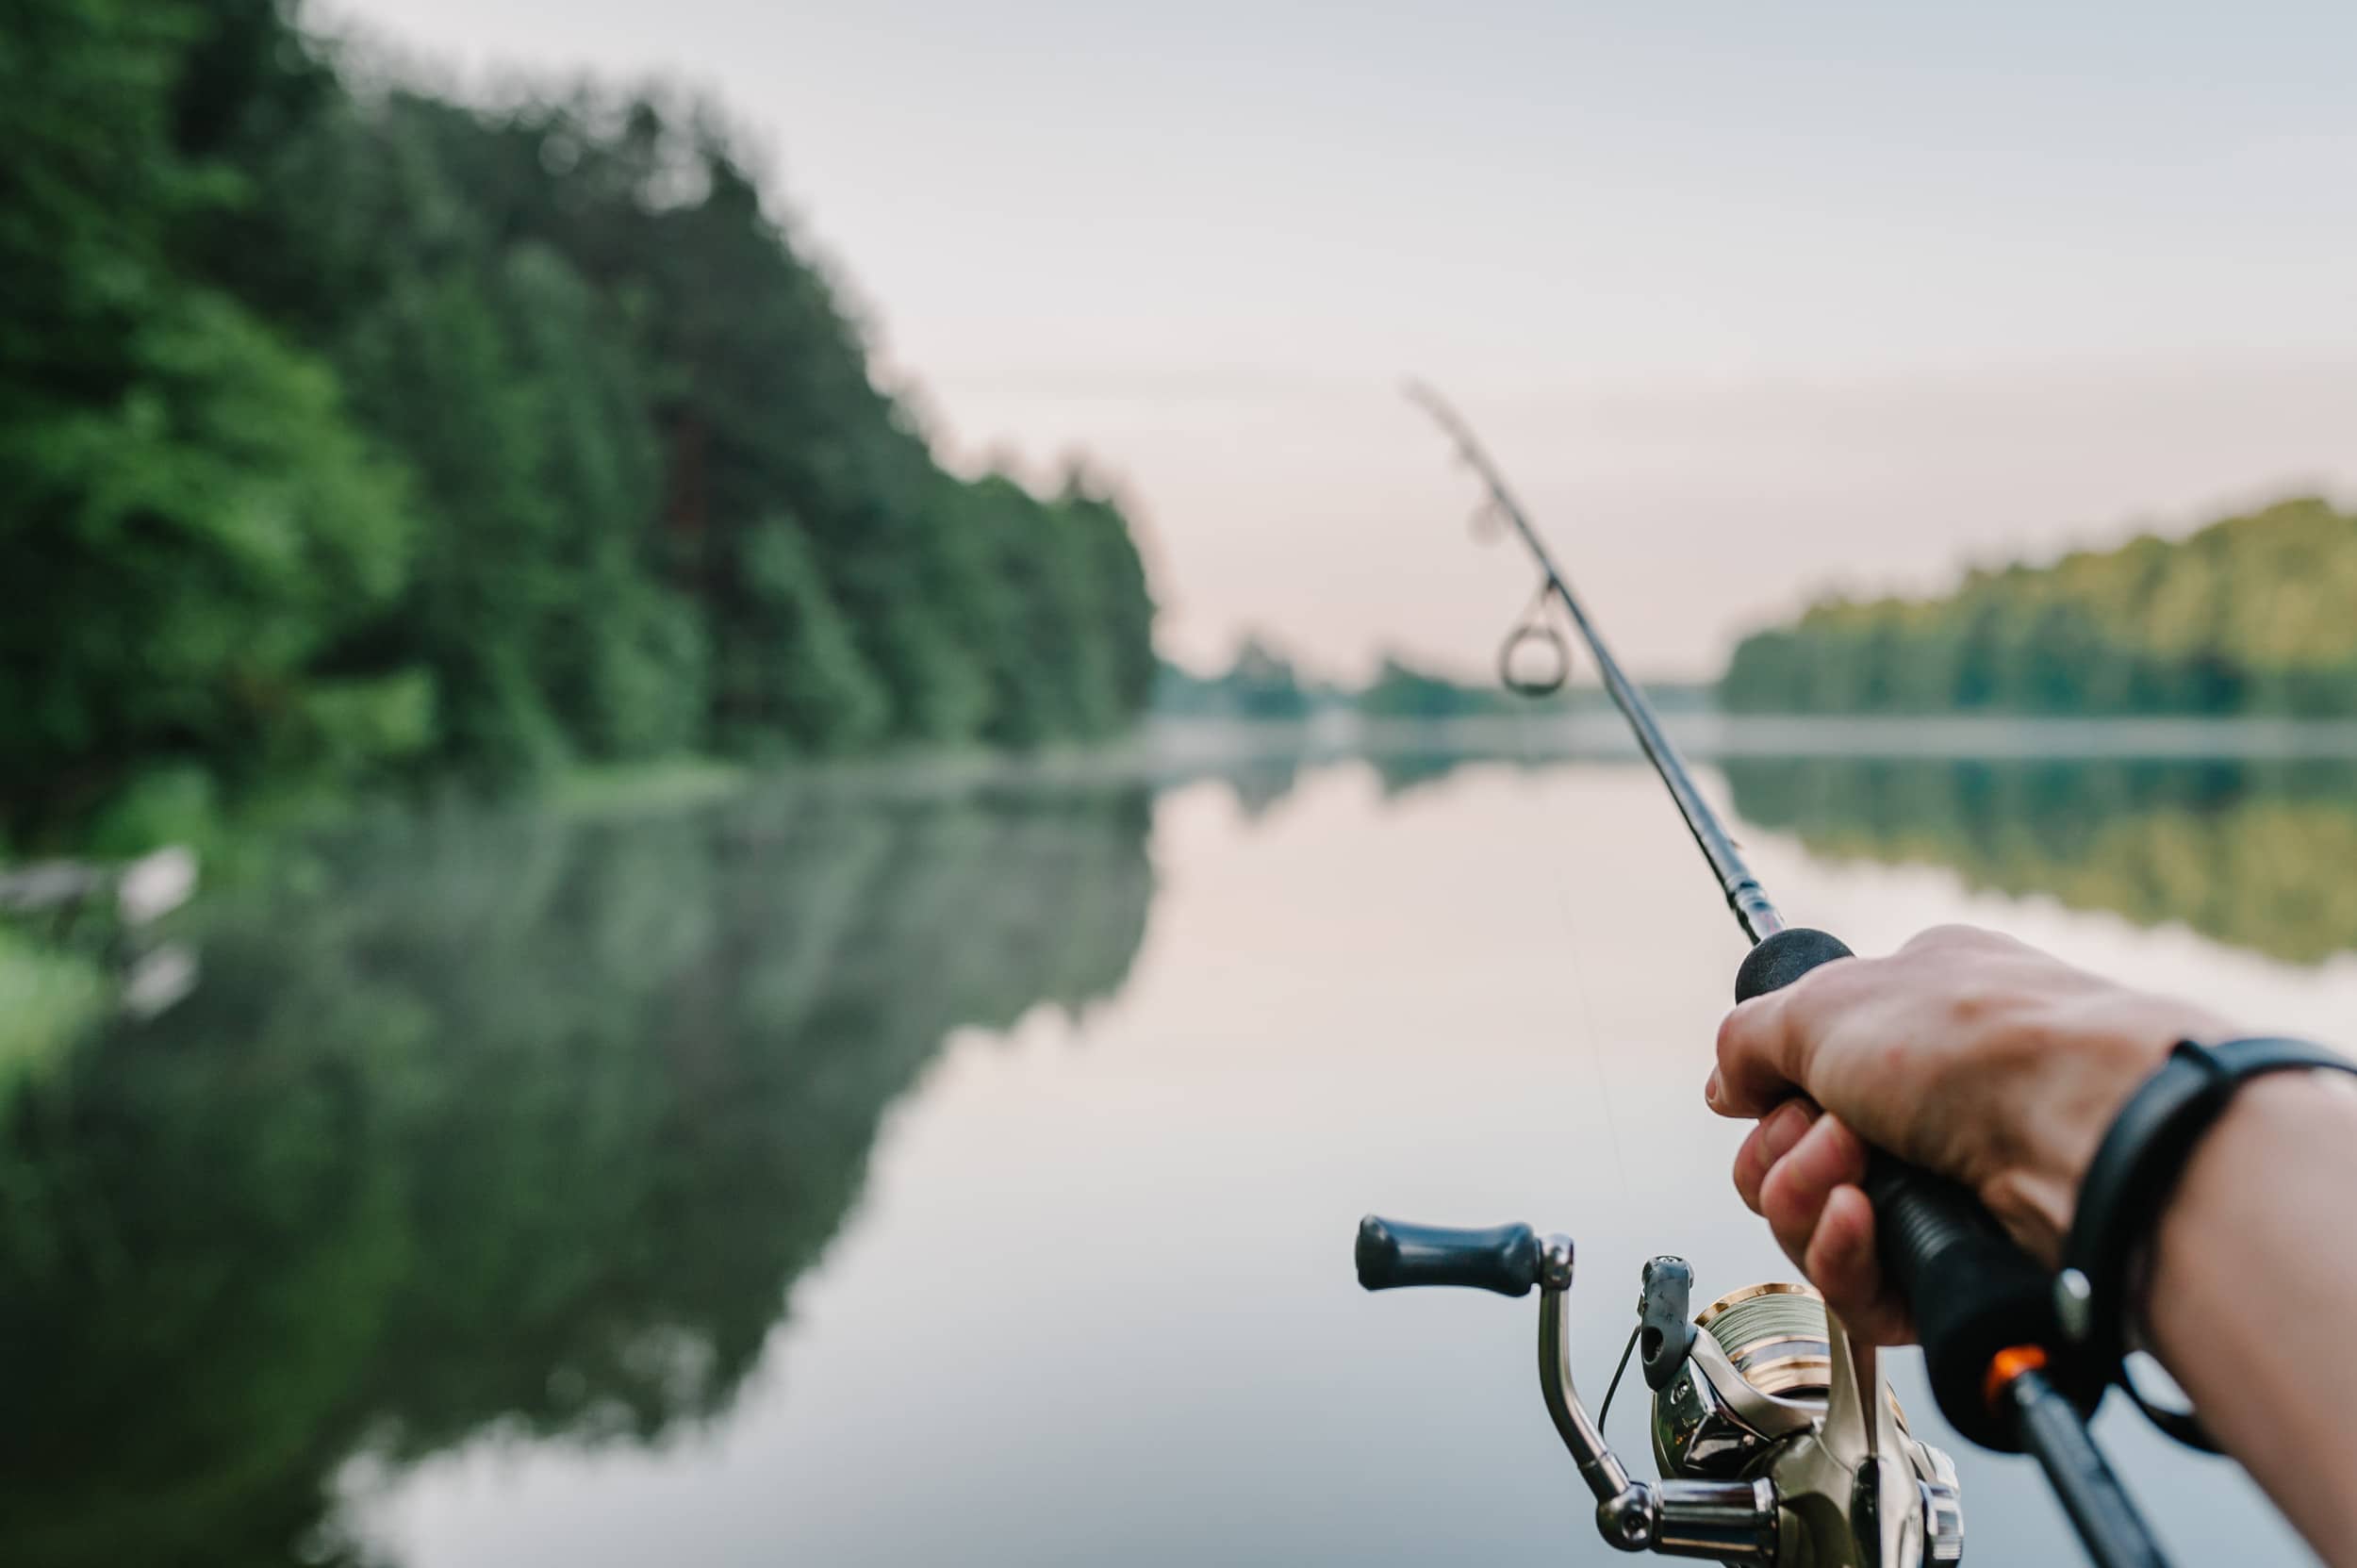 national-fishing-day-does-not-mean-phishing-day